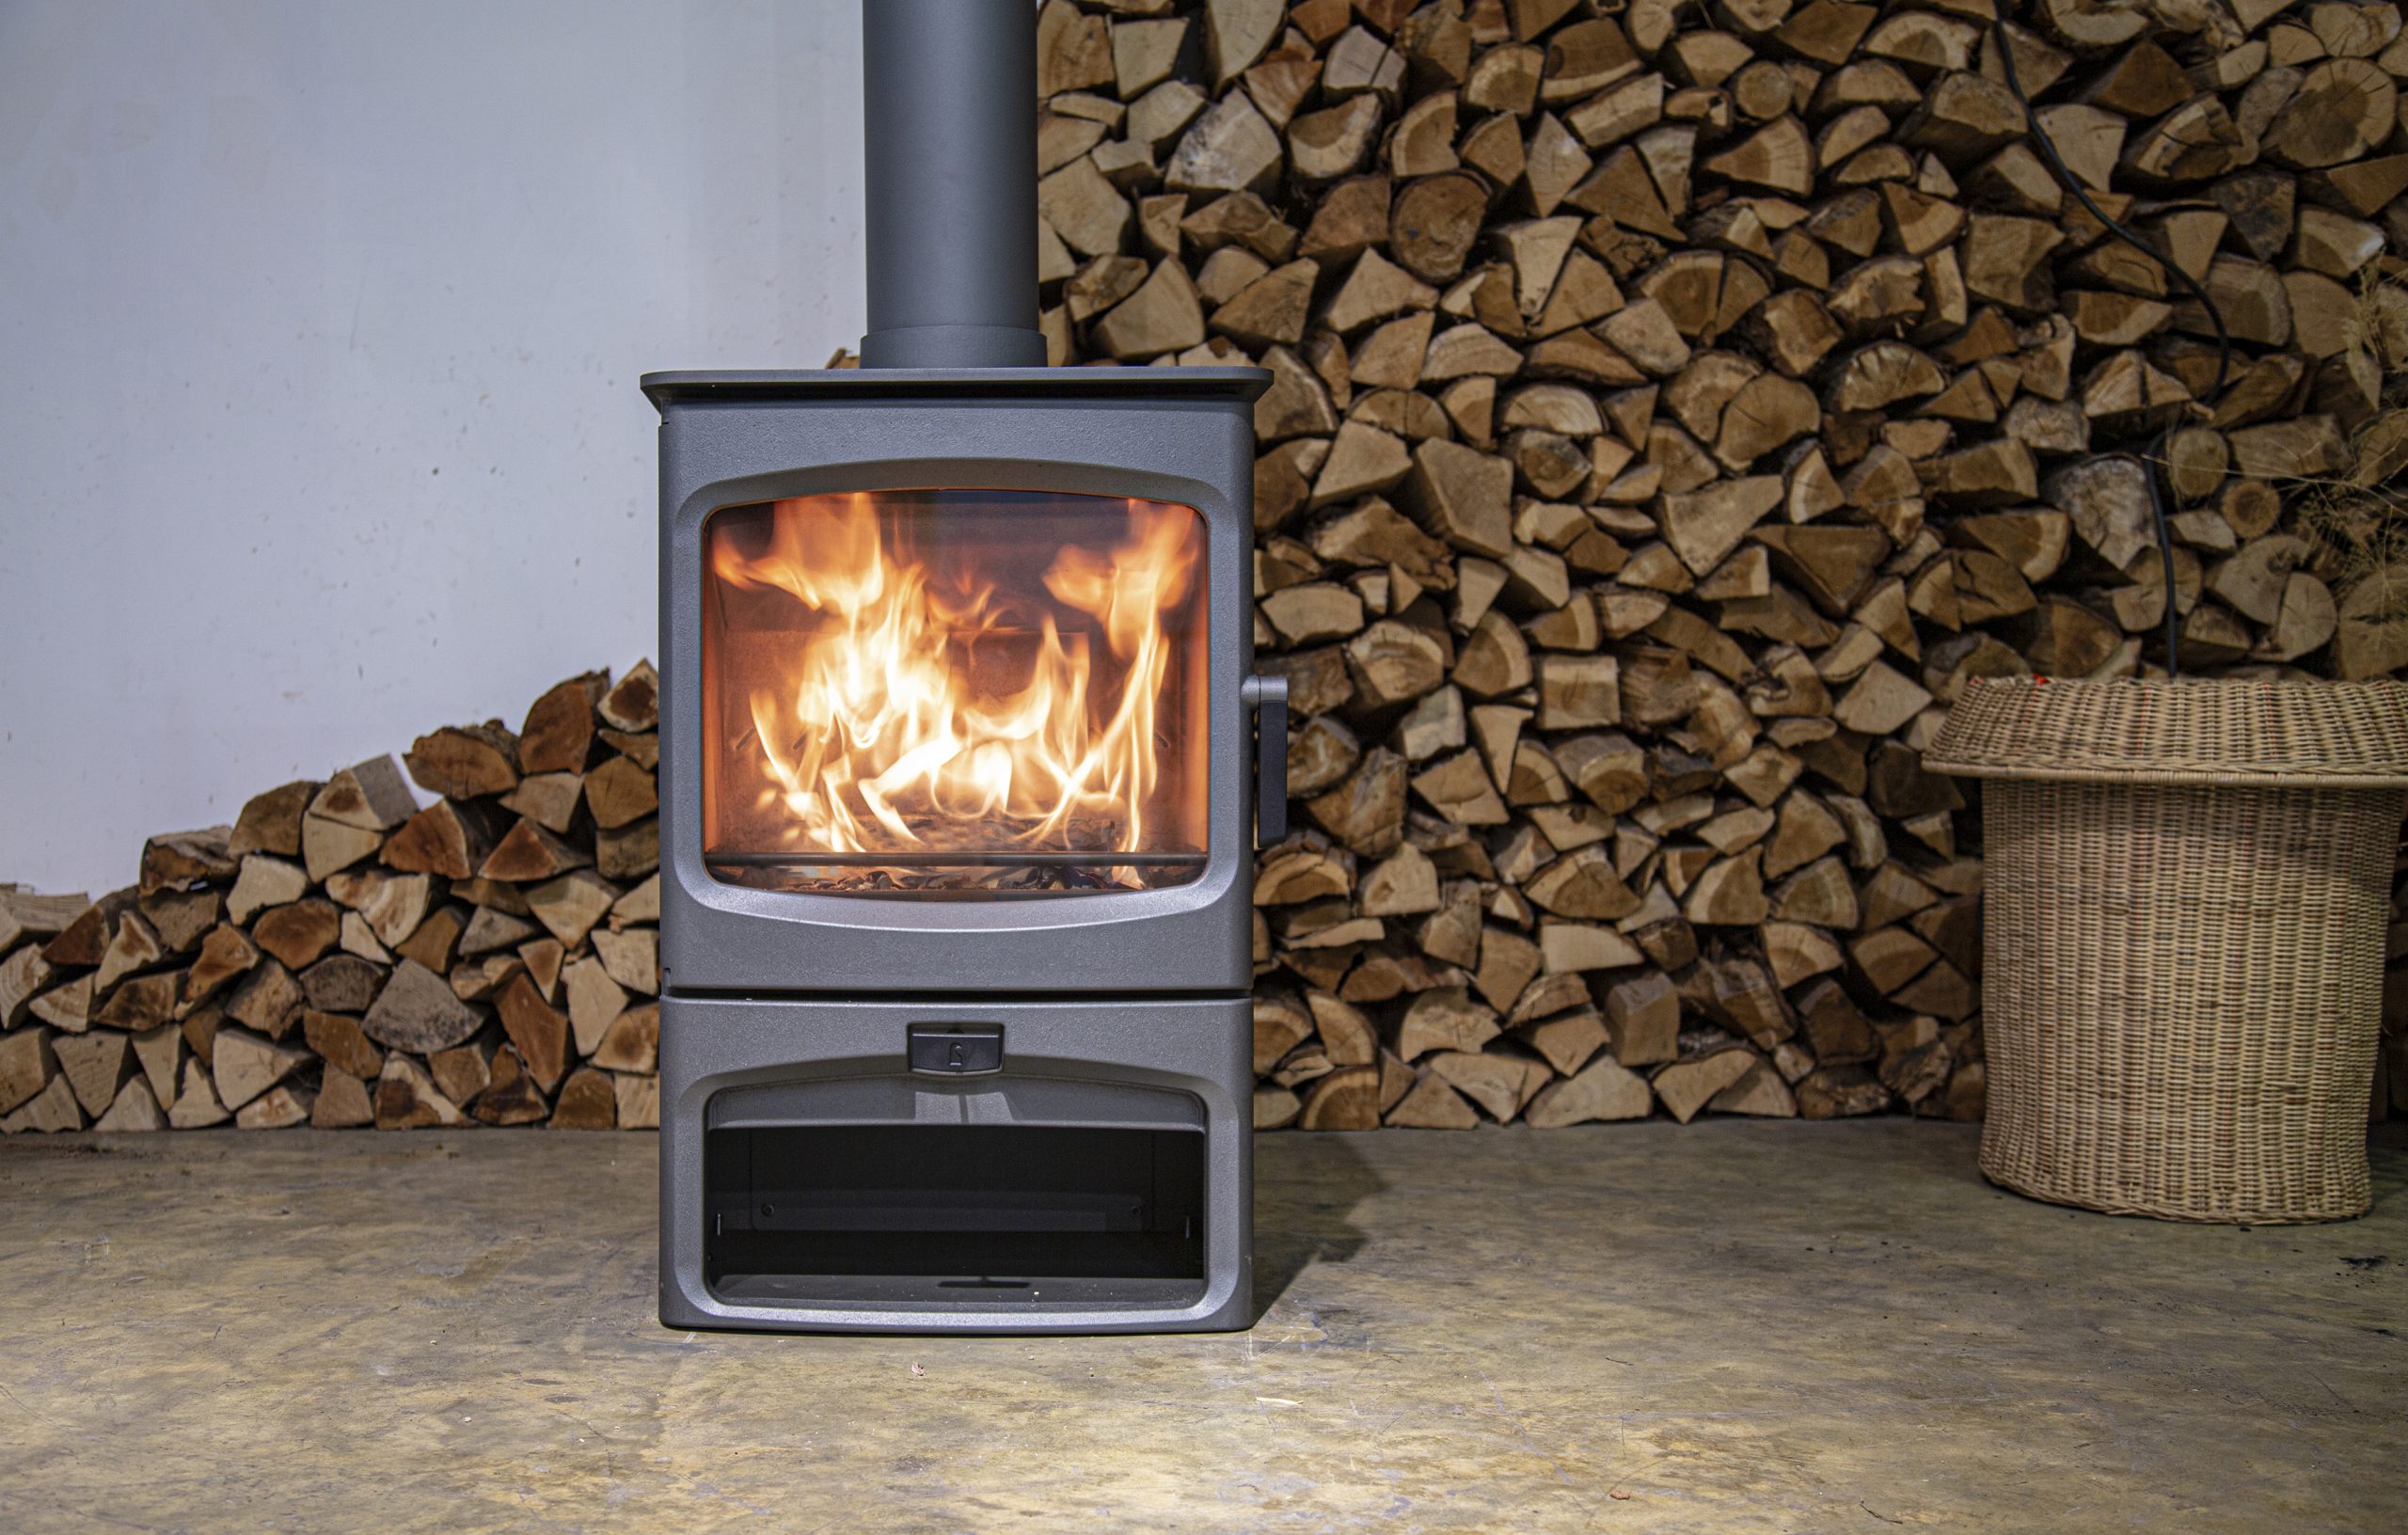 The Best Firewood for Your Wood Stove or Fireplace